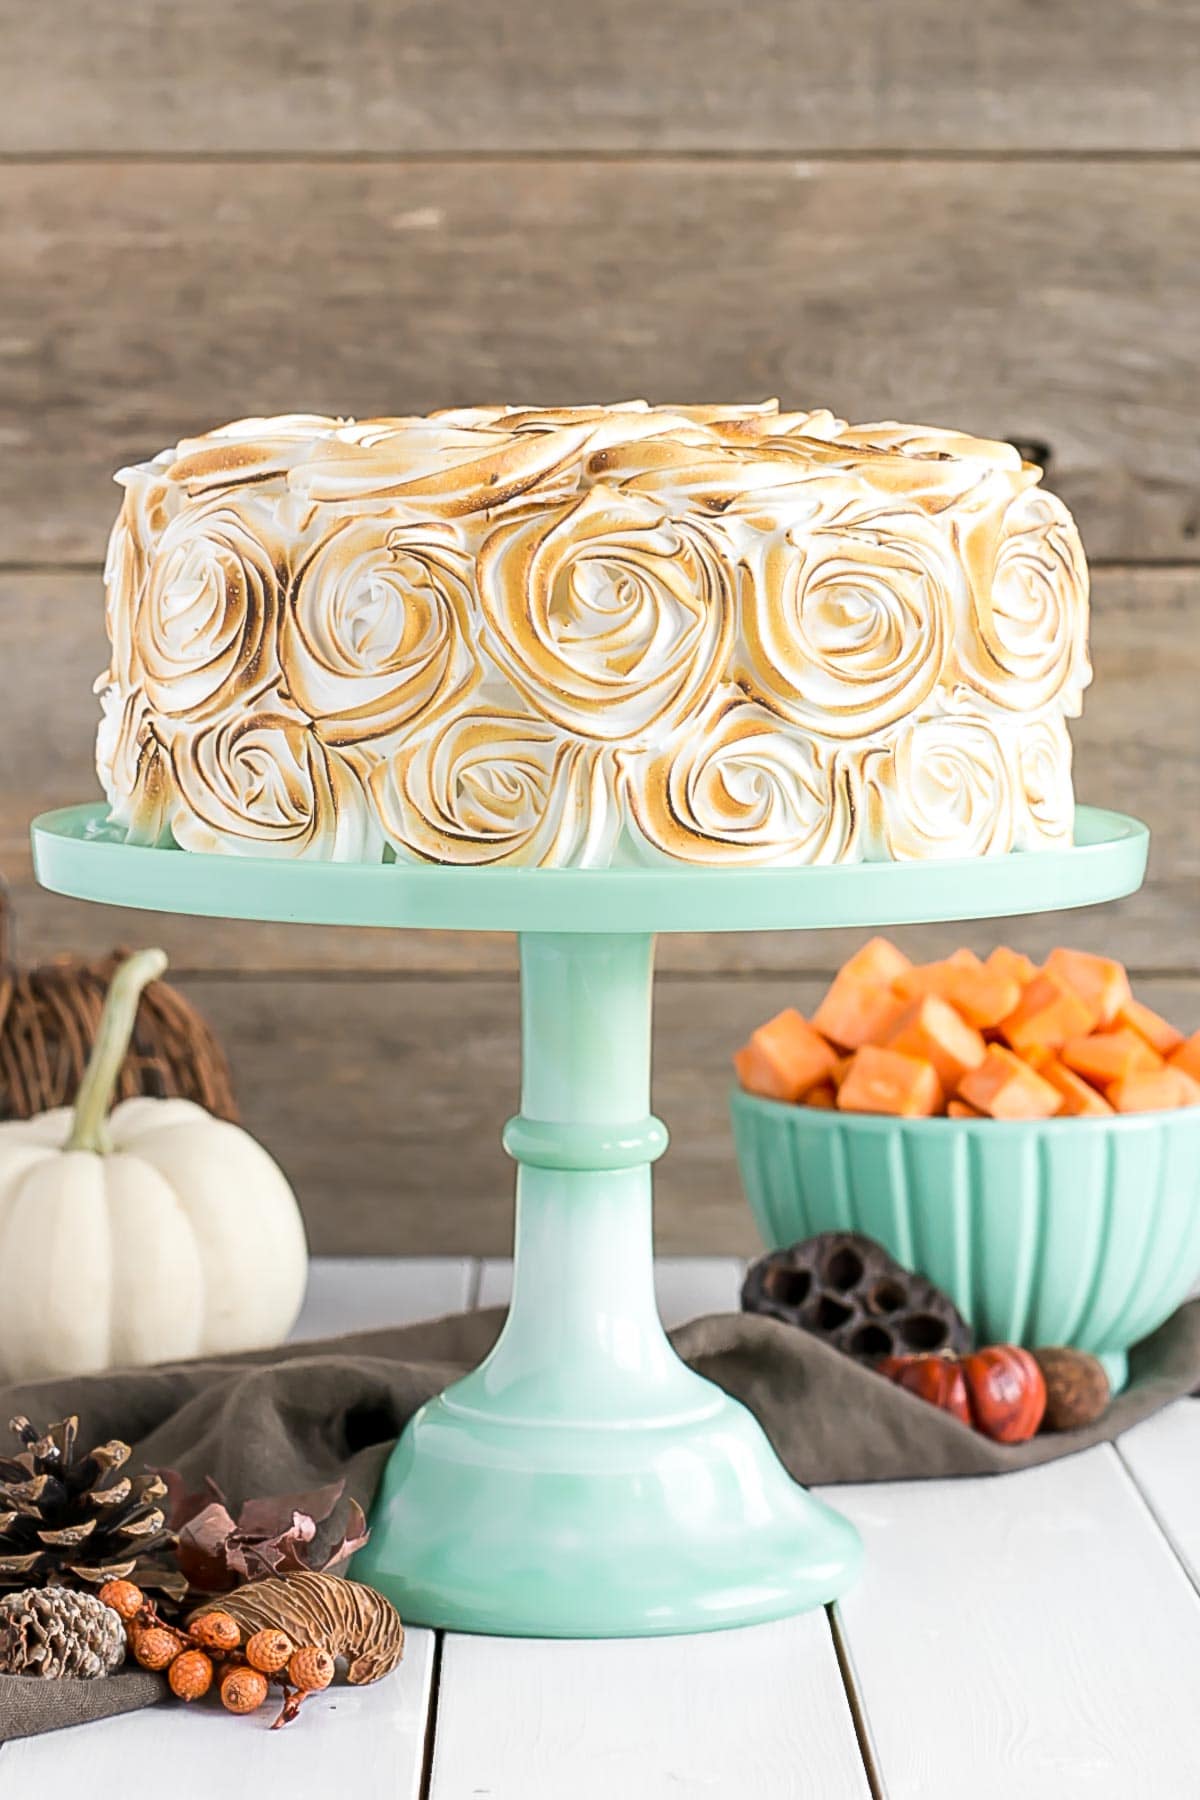 Cake on a mint green cake stand with fall decor in the background.